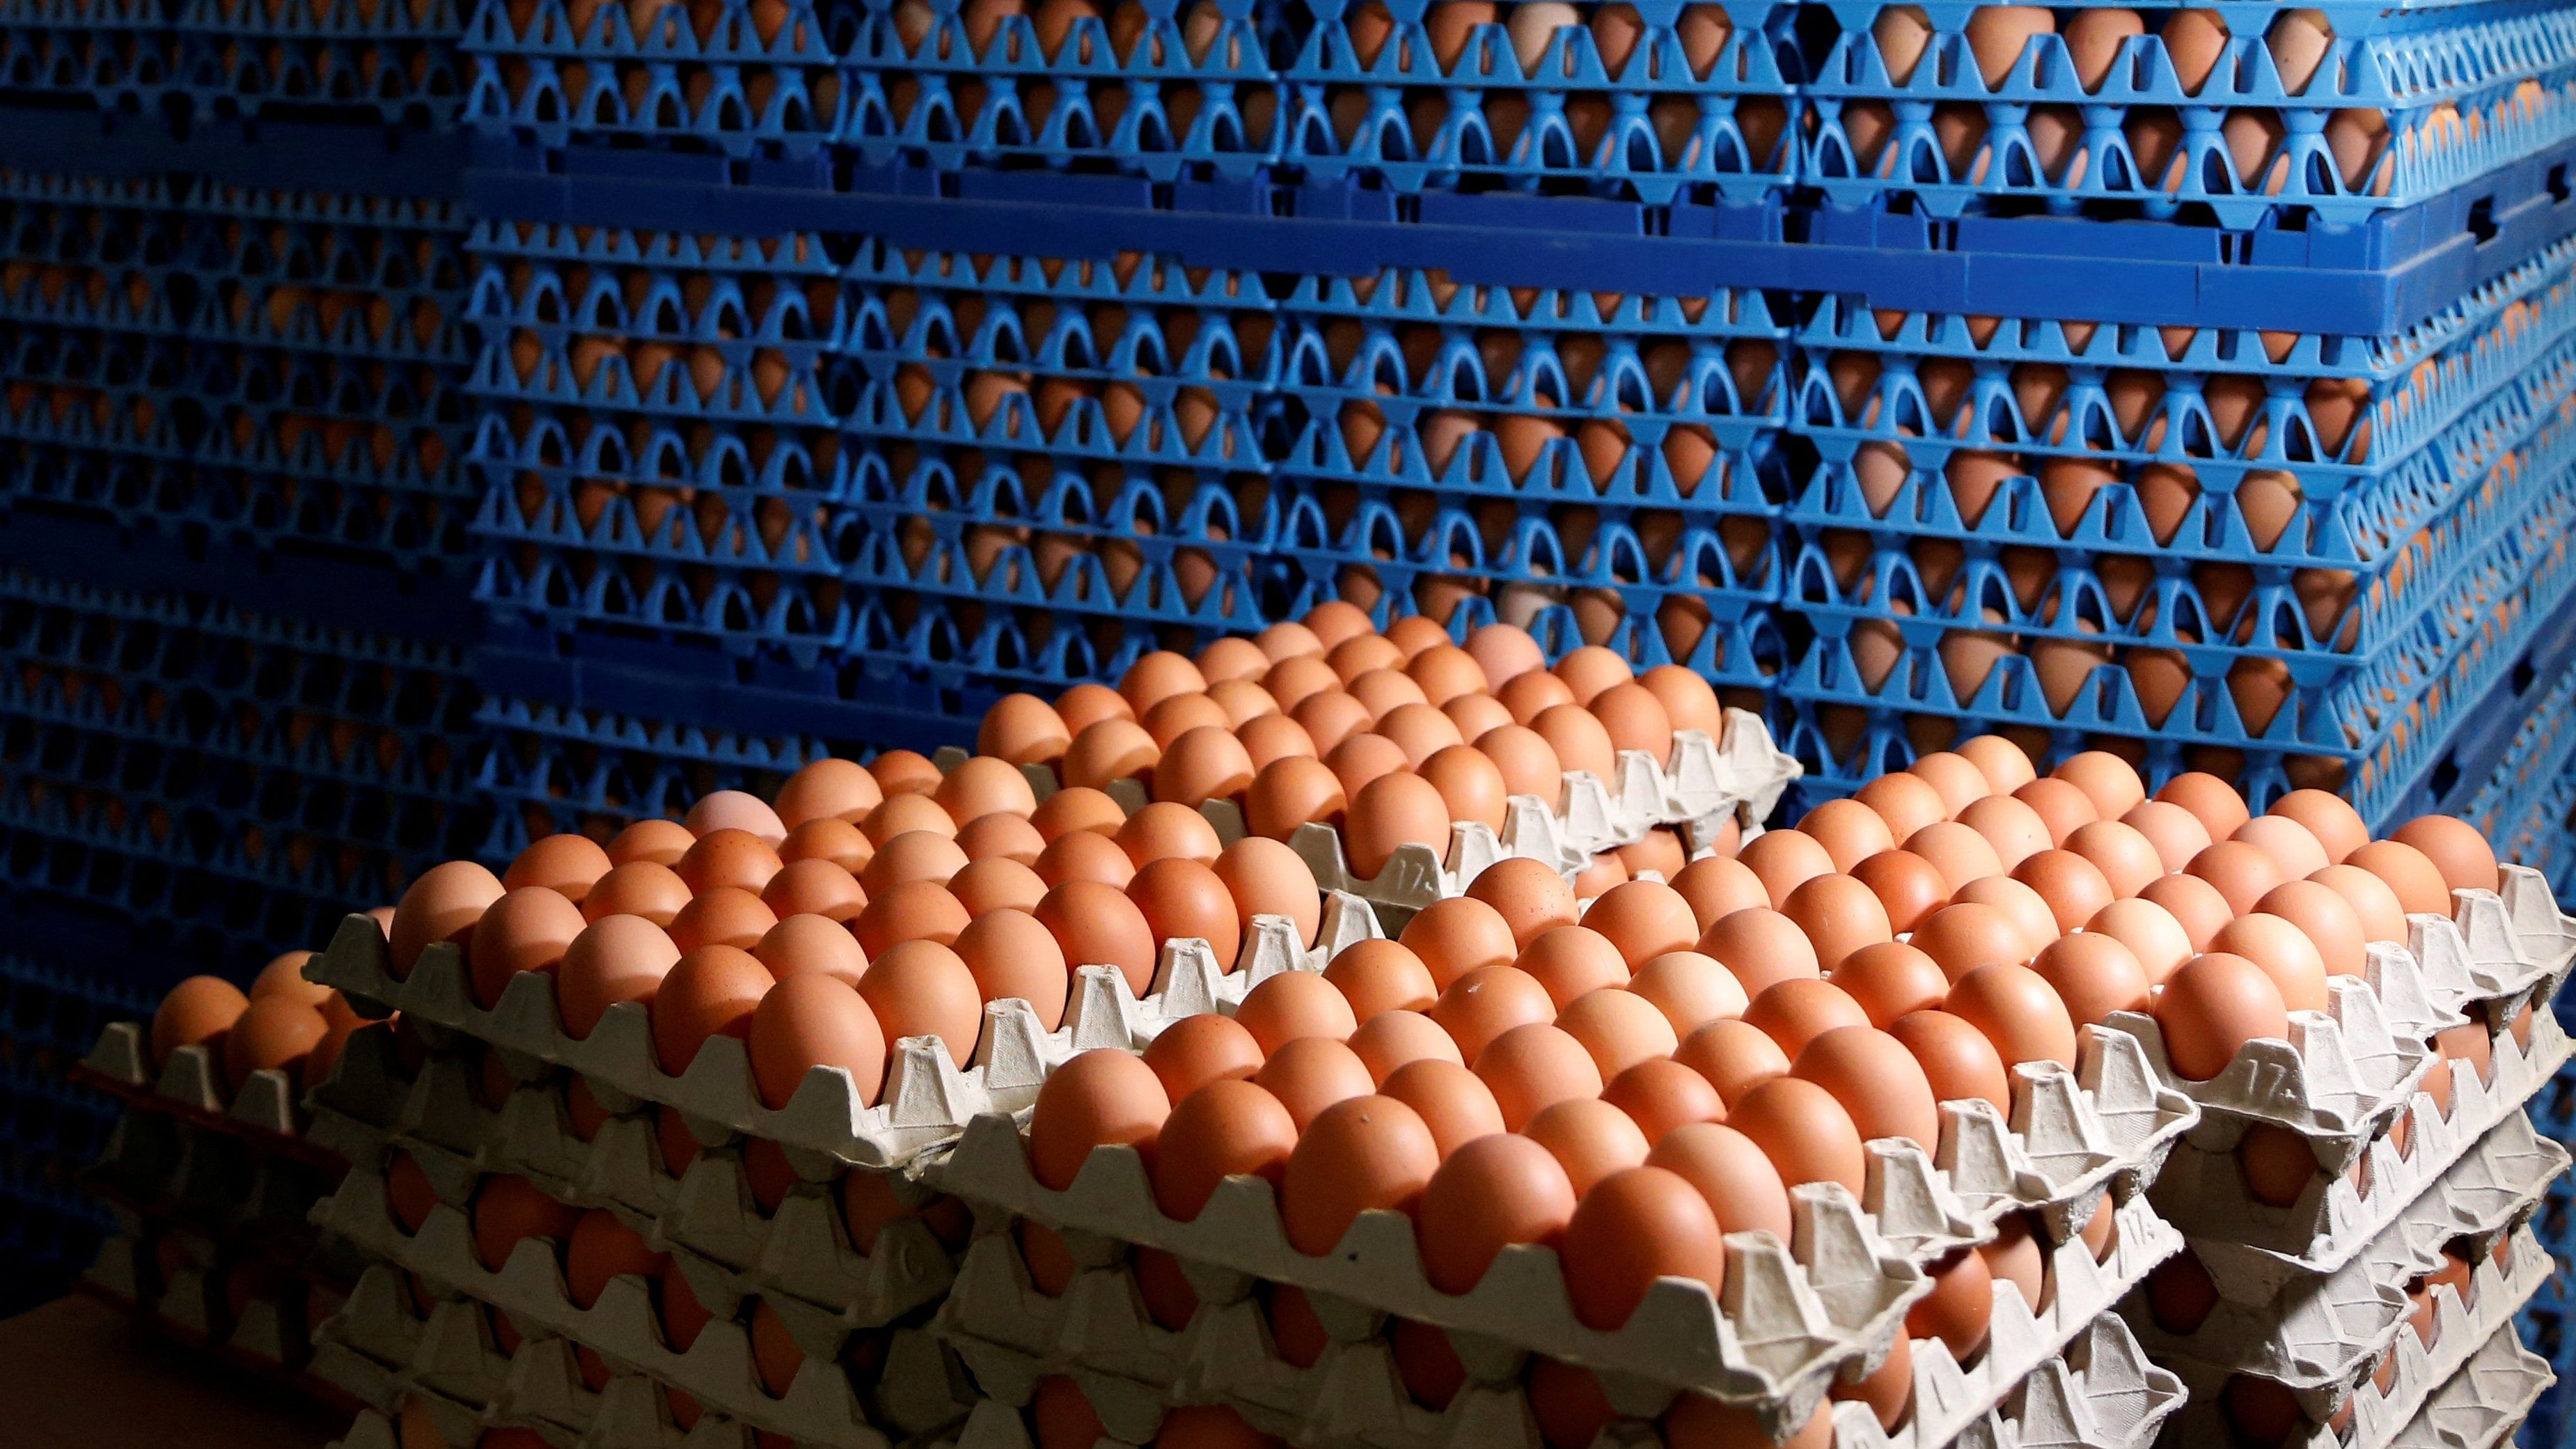 Egg prices are expected to stay elevated, producers said, as it will take months to resume operations on infected farms. Credit: Reuters File Photo